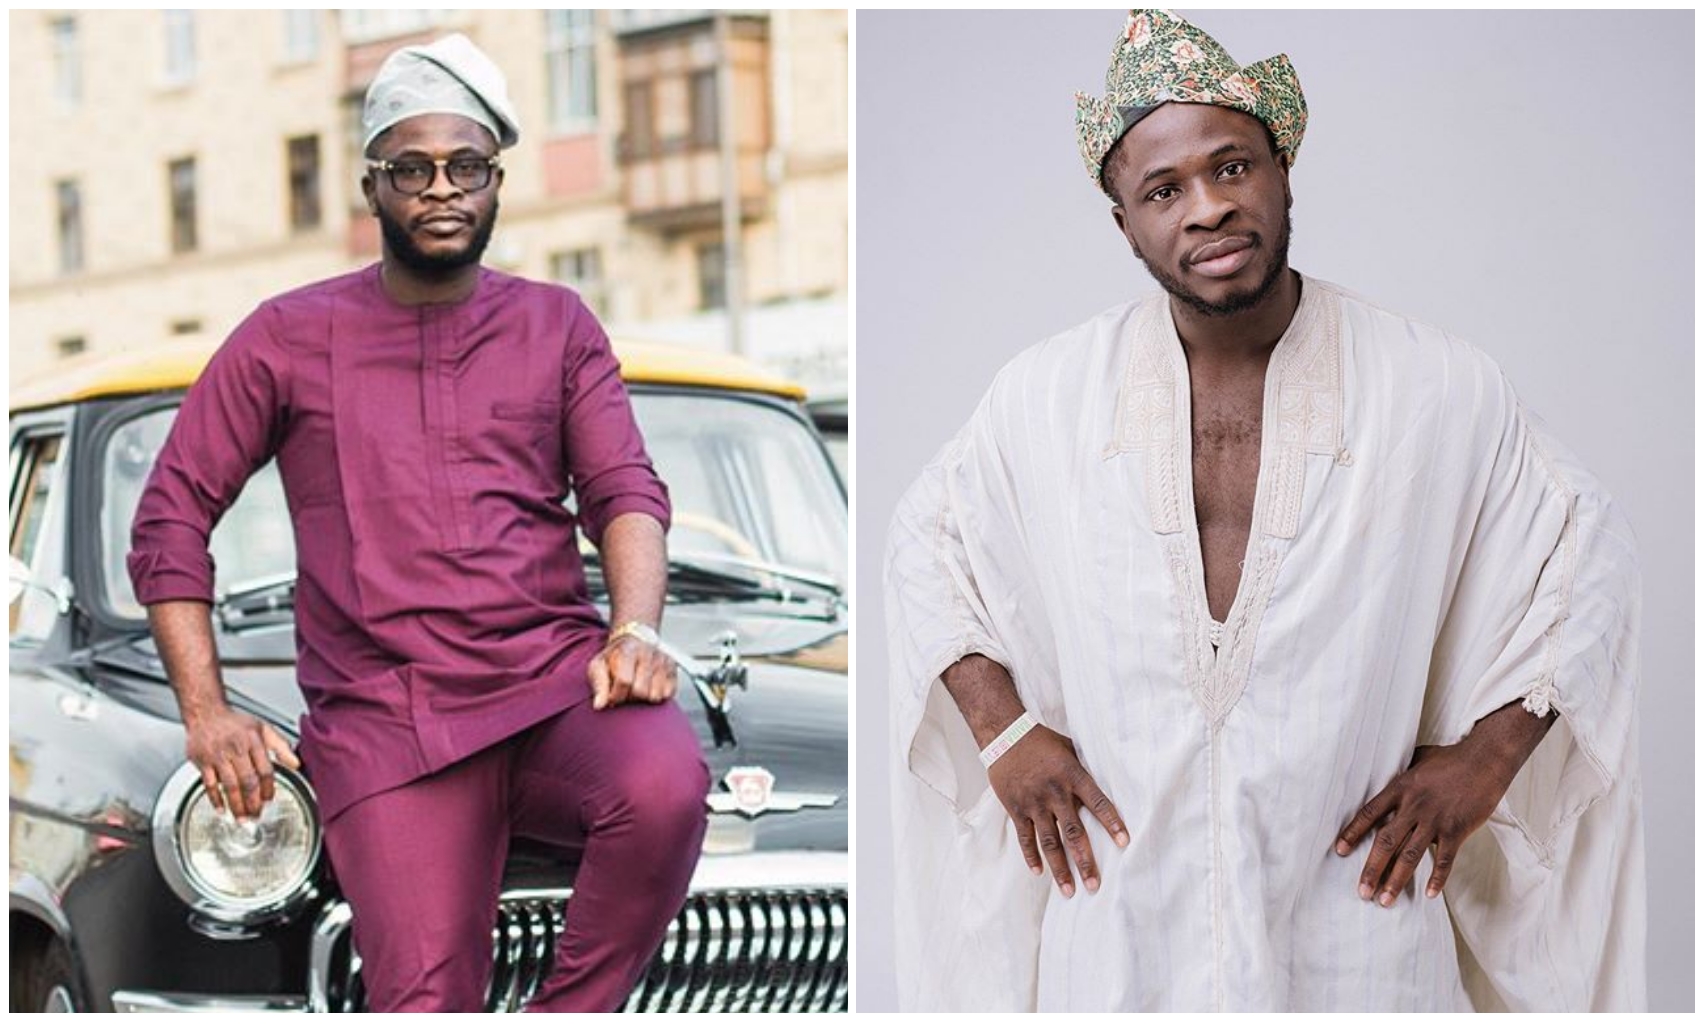 Be patient e go reach your turn – Comedian Craze Clown says as he model for Vogue (Photo)